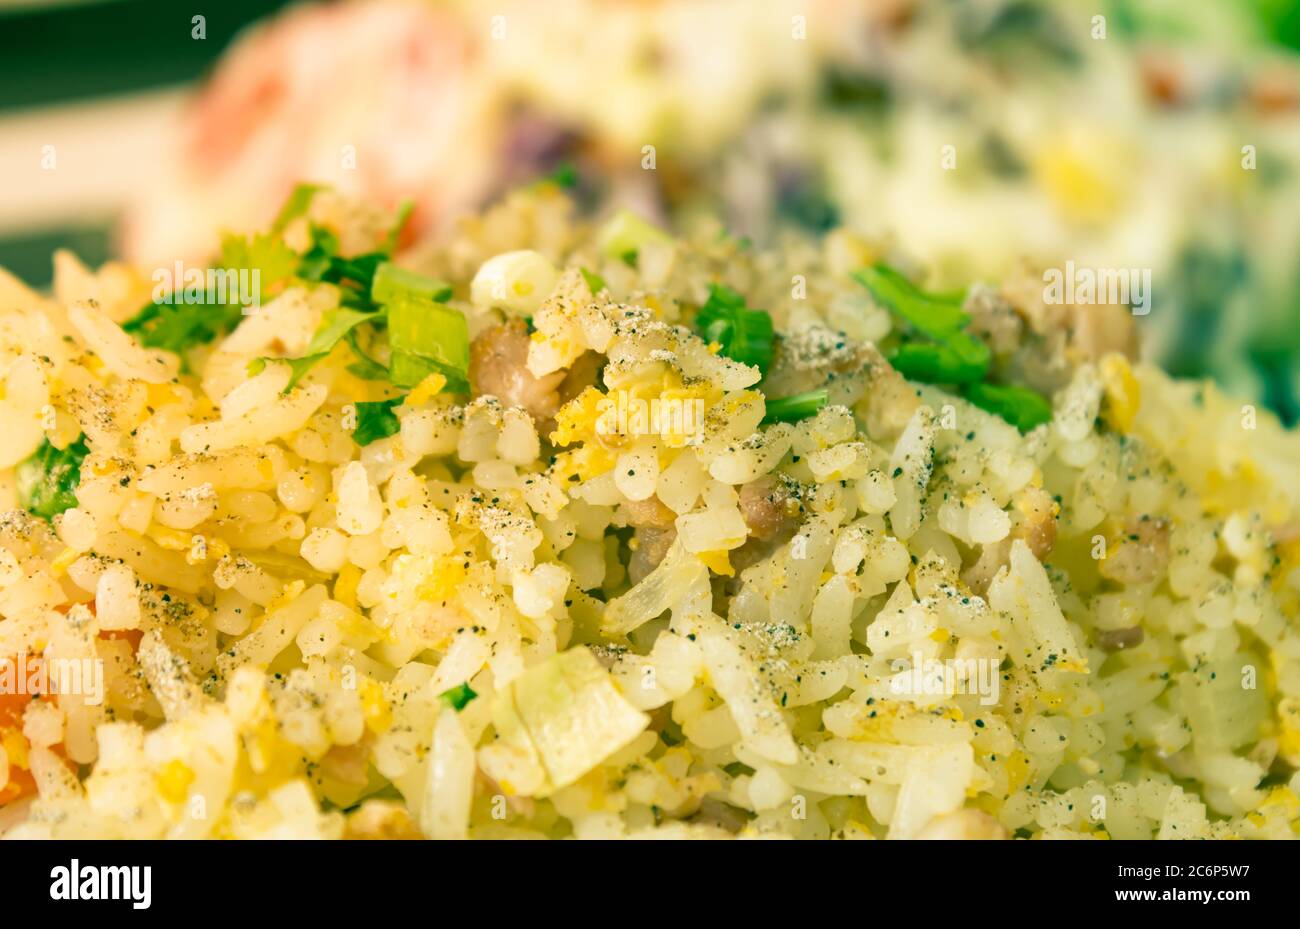 Thai Sour Pork Fried Rice and Salad in Dish with Natural Light in Close Up View in Vintage Tone Stock Photo